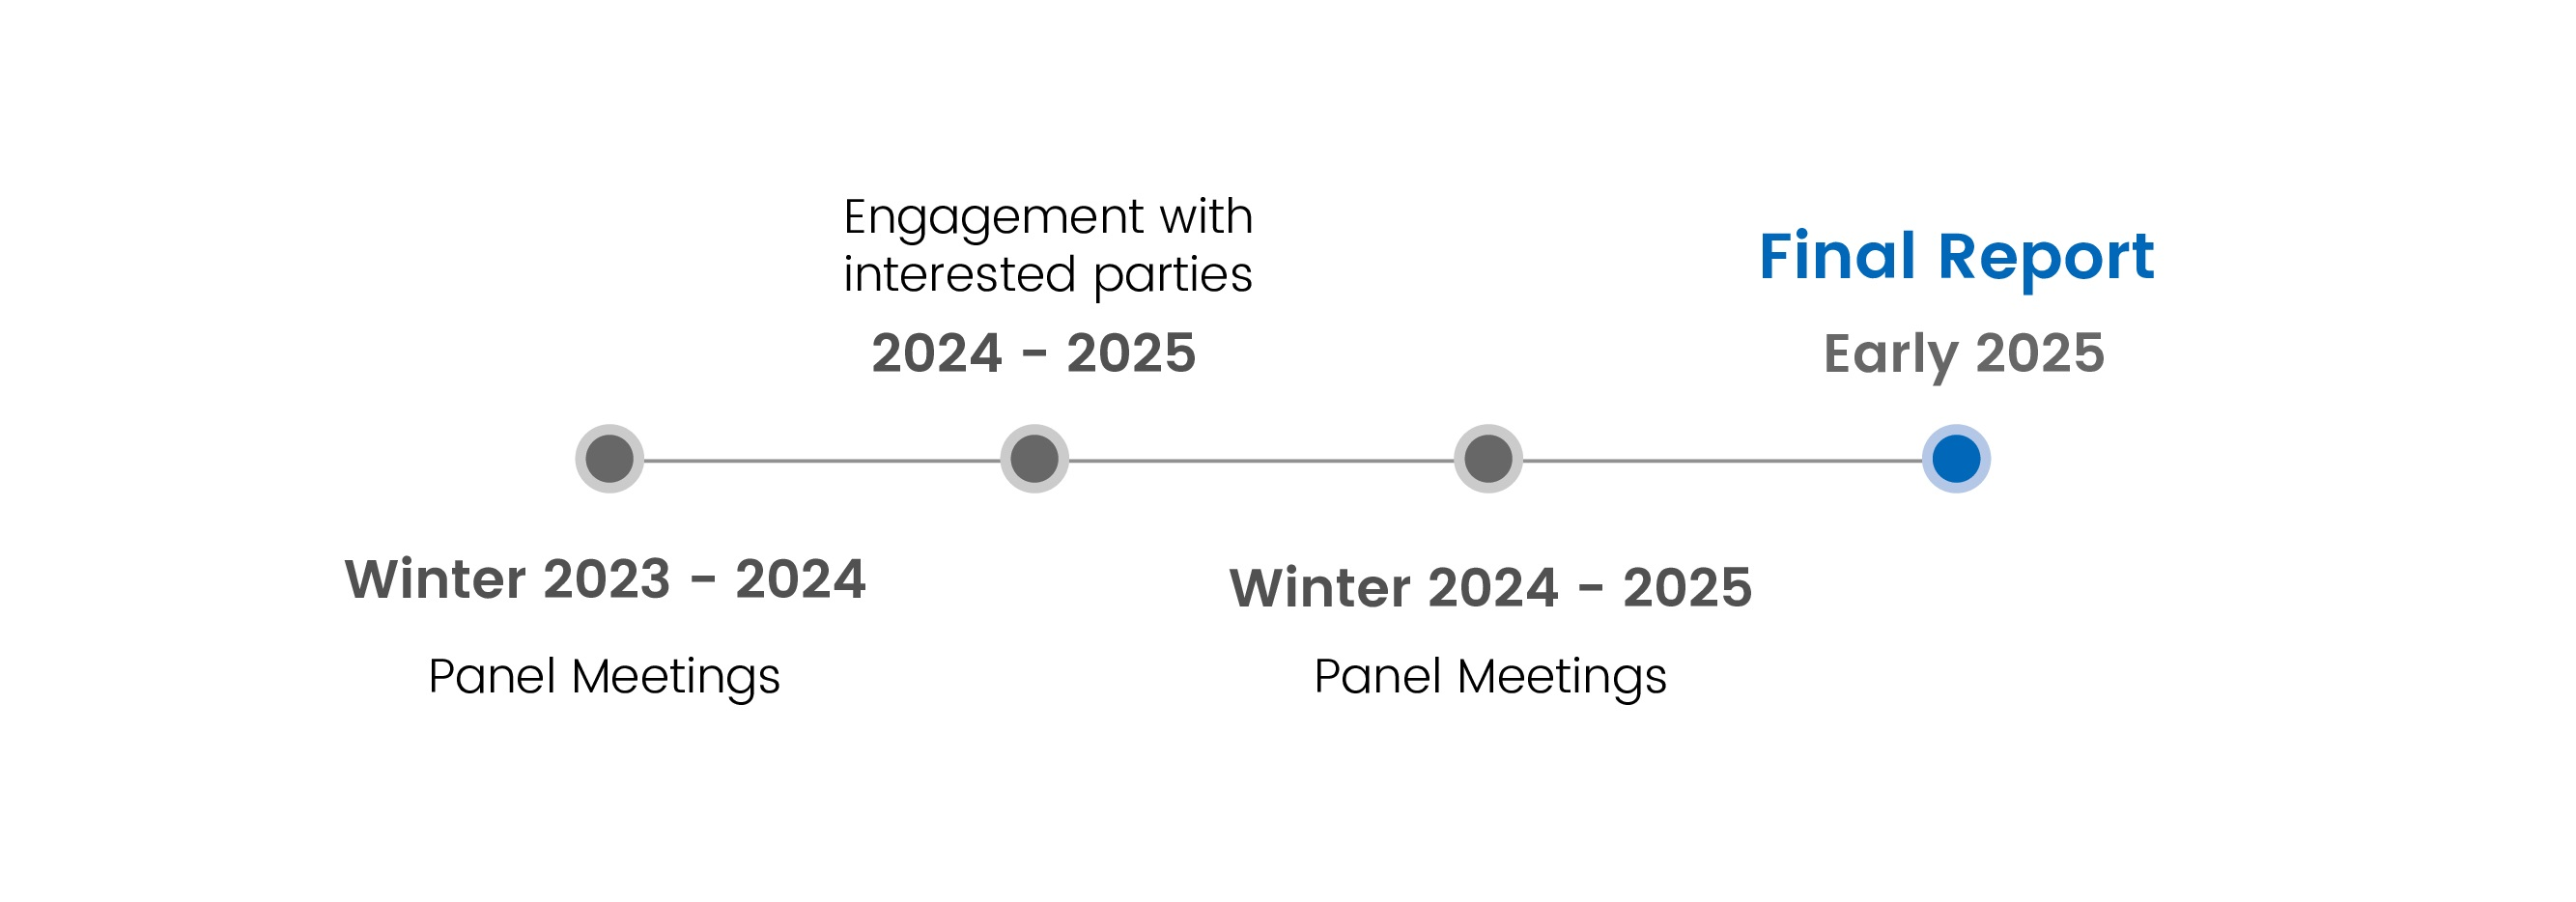 Project timeline: panel meetings, winter 2023-2024; partner engagement, 2024-2025; panel meetings, winter 2024-2025; and final report, early 2025